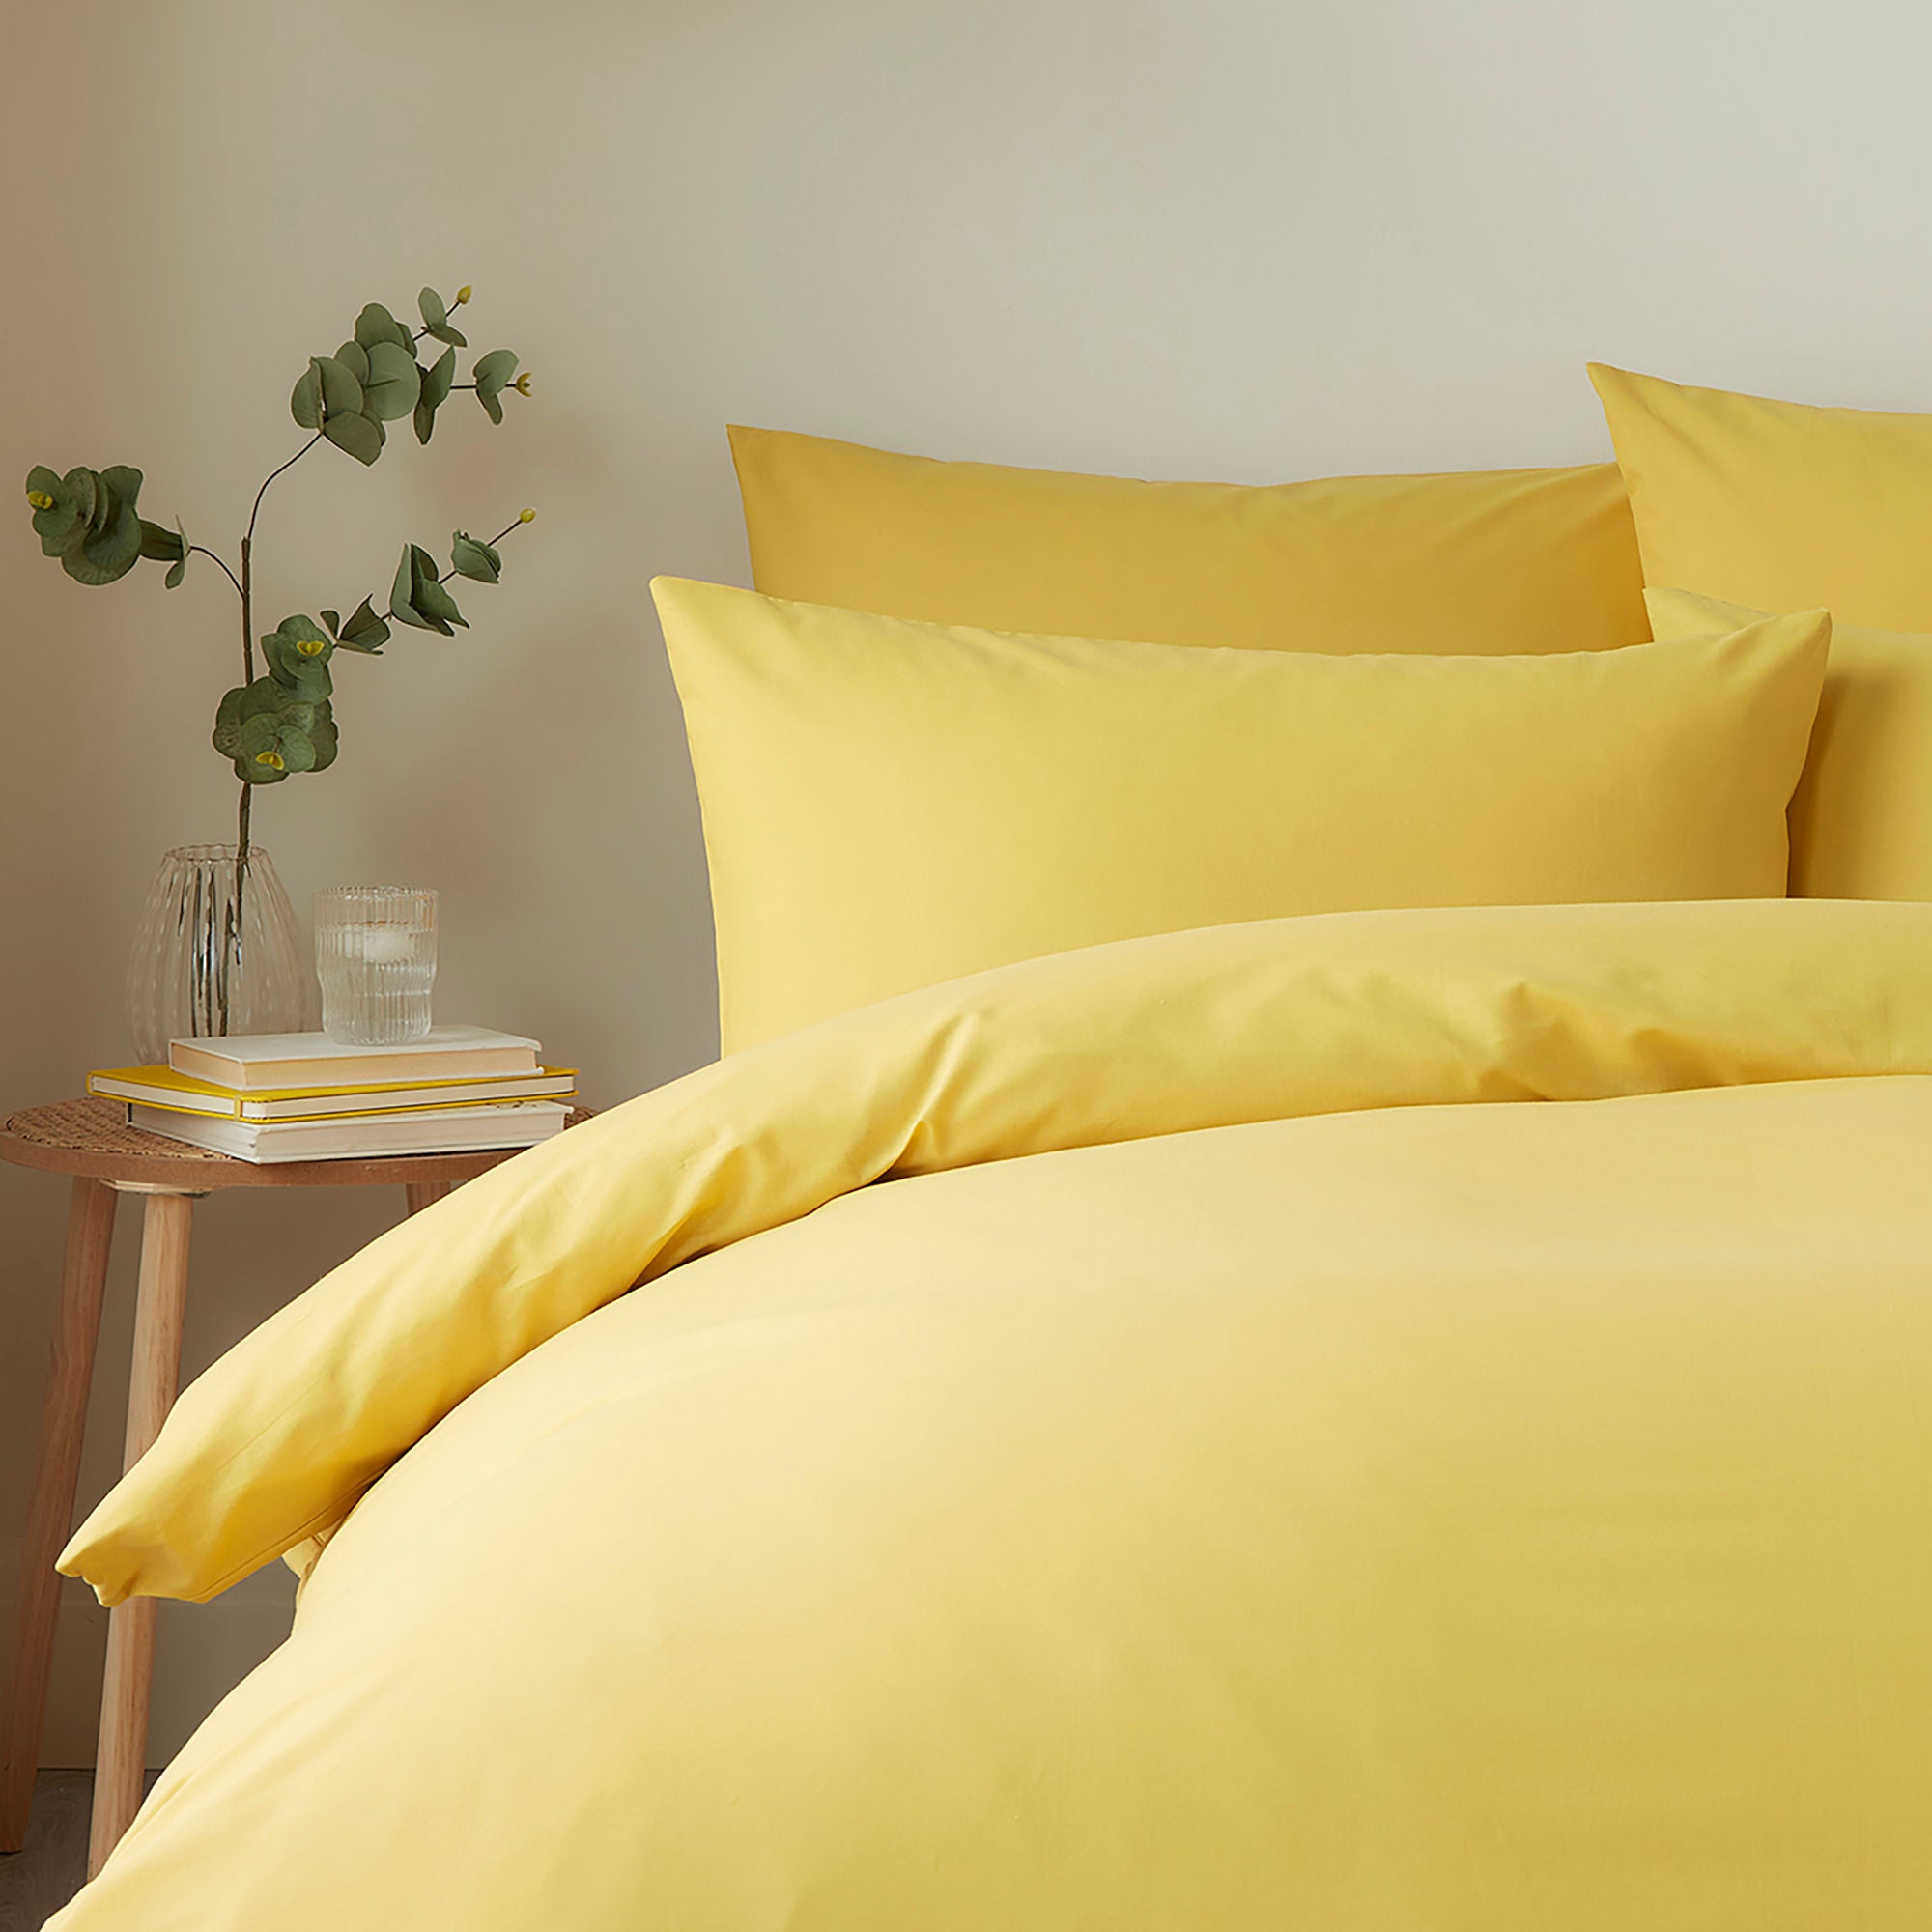 Appletree Pure Cotton Duvet Cover Set by Appletree Style in Yellow - Duvet Cover Set - Appletree Style